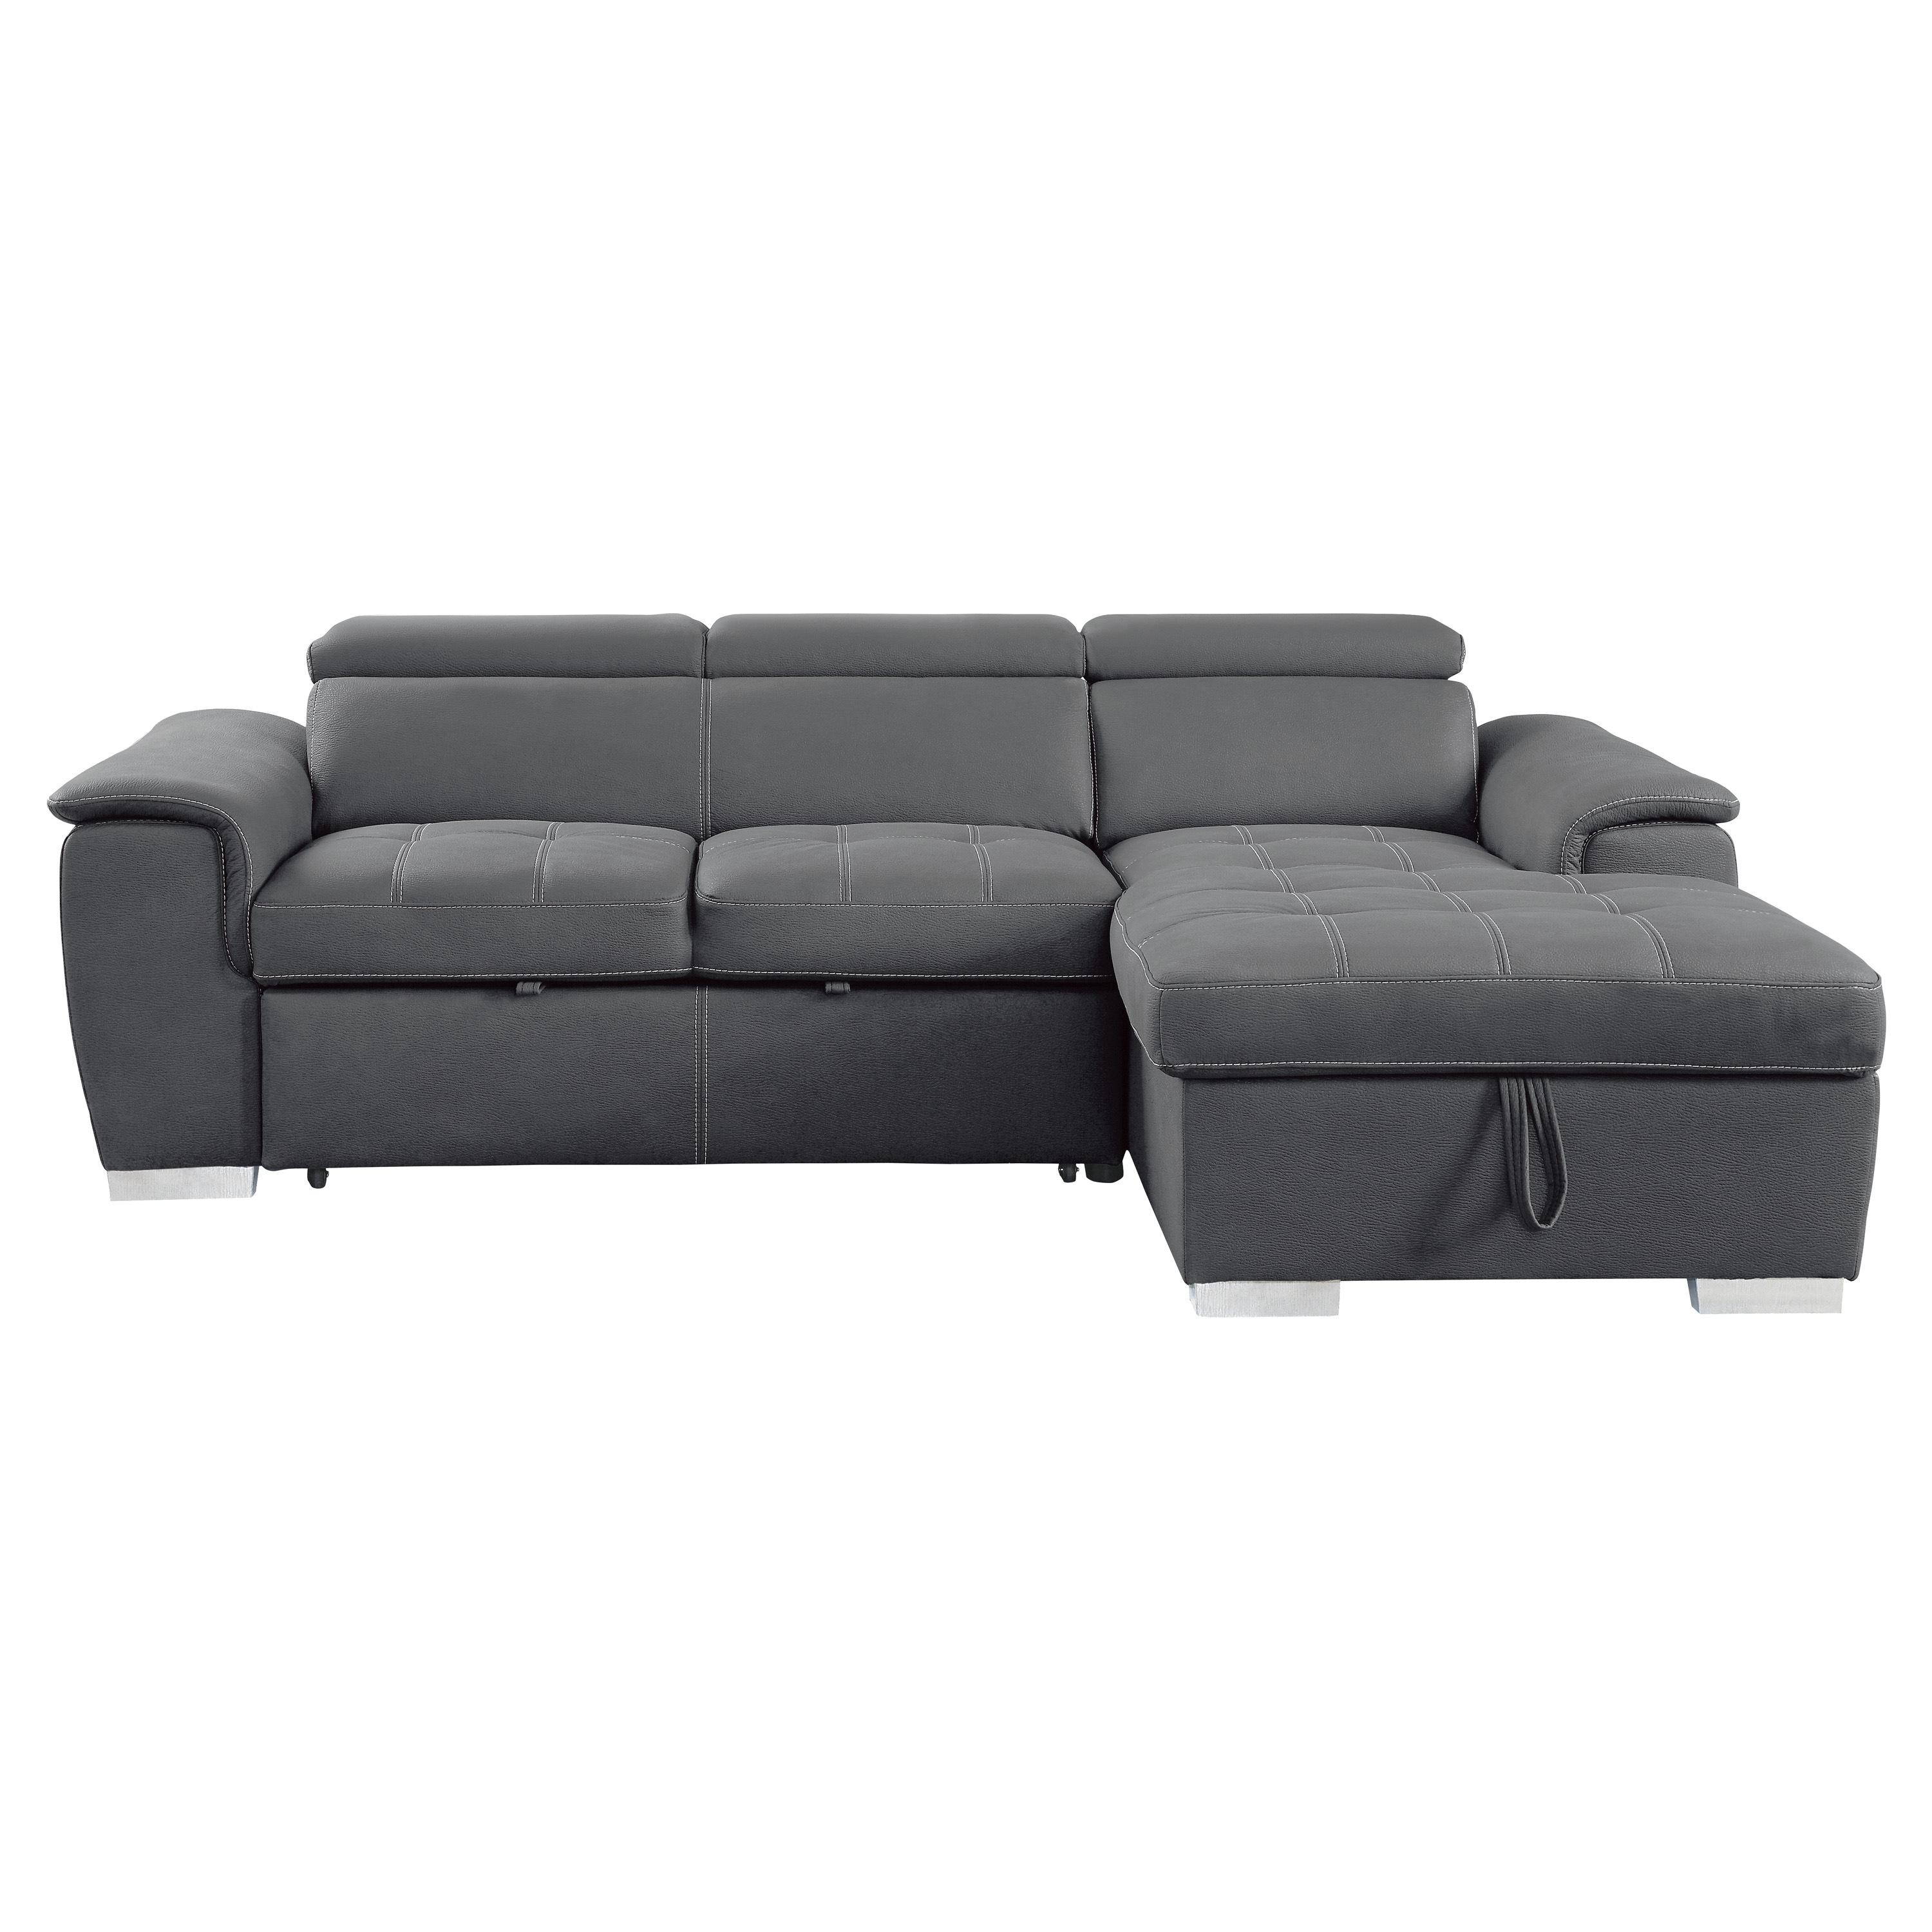 Contemporary Sectional 8228GY* Ferriday 8228GY* in Gray Microfiber